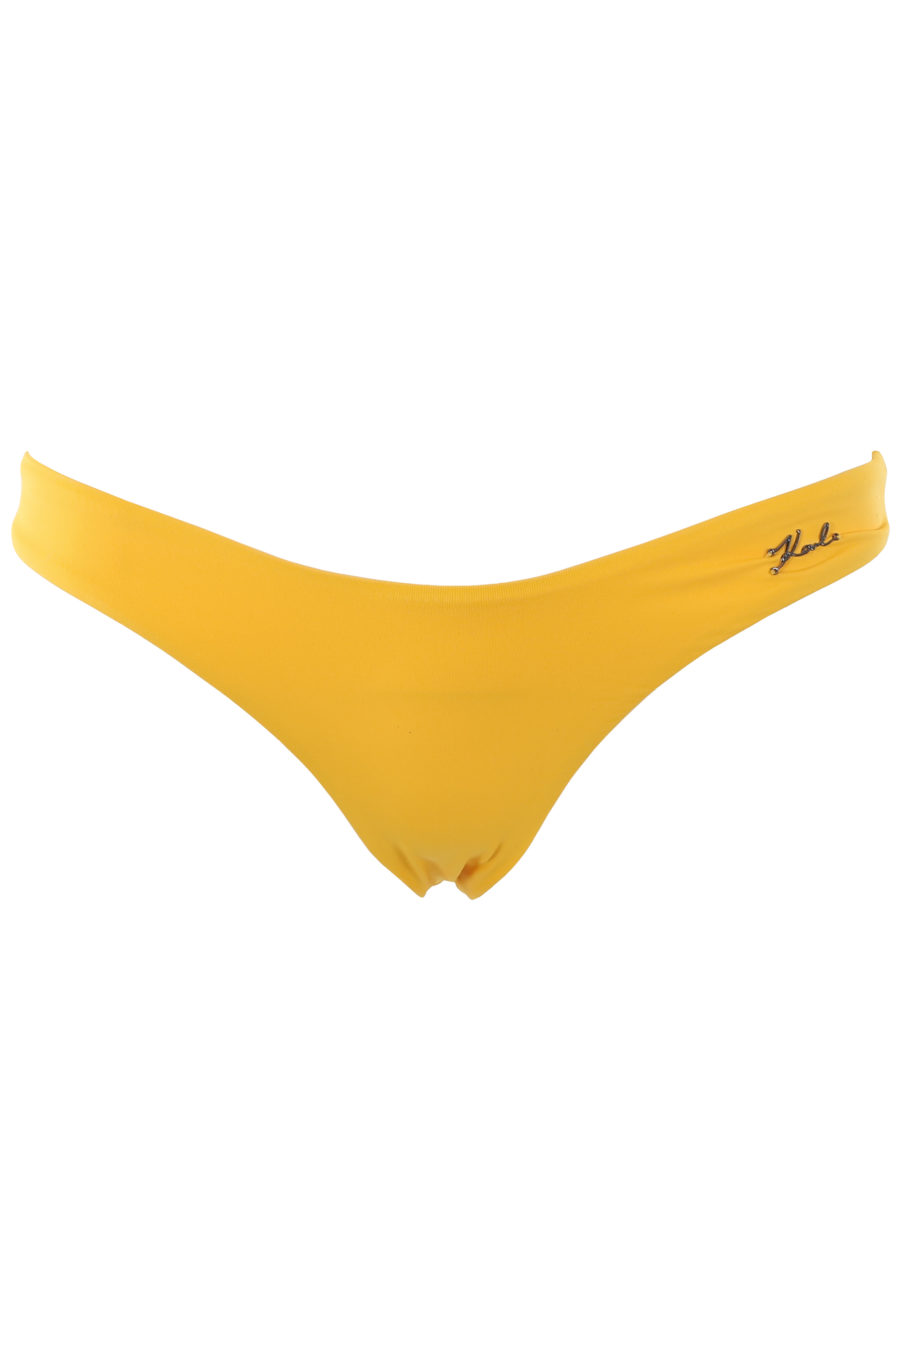 Yellow swimming costume with small metal lettering logo - IMG 1313